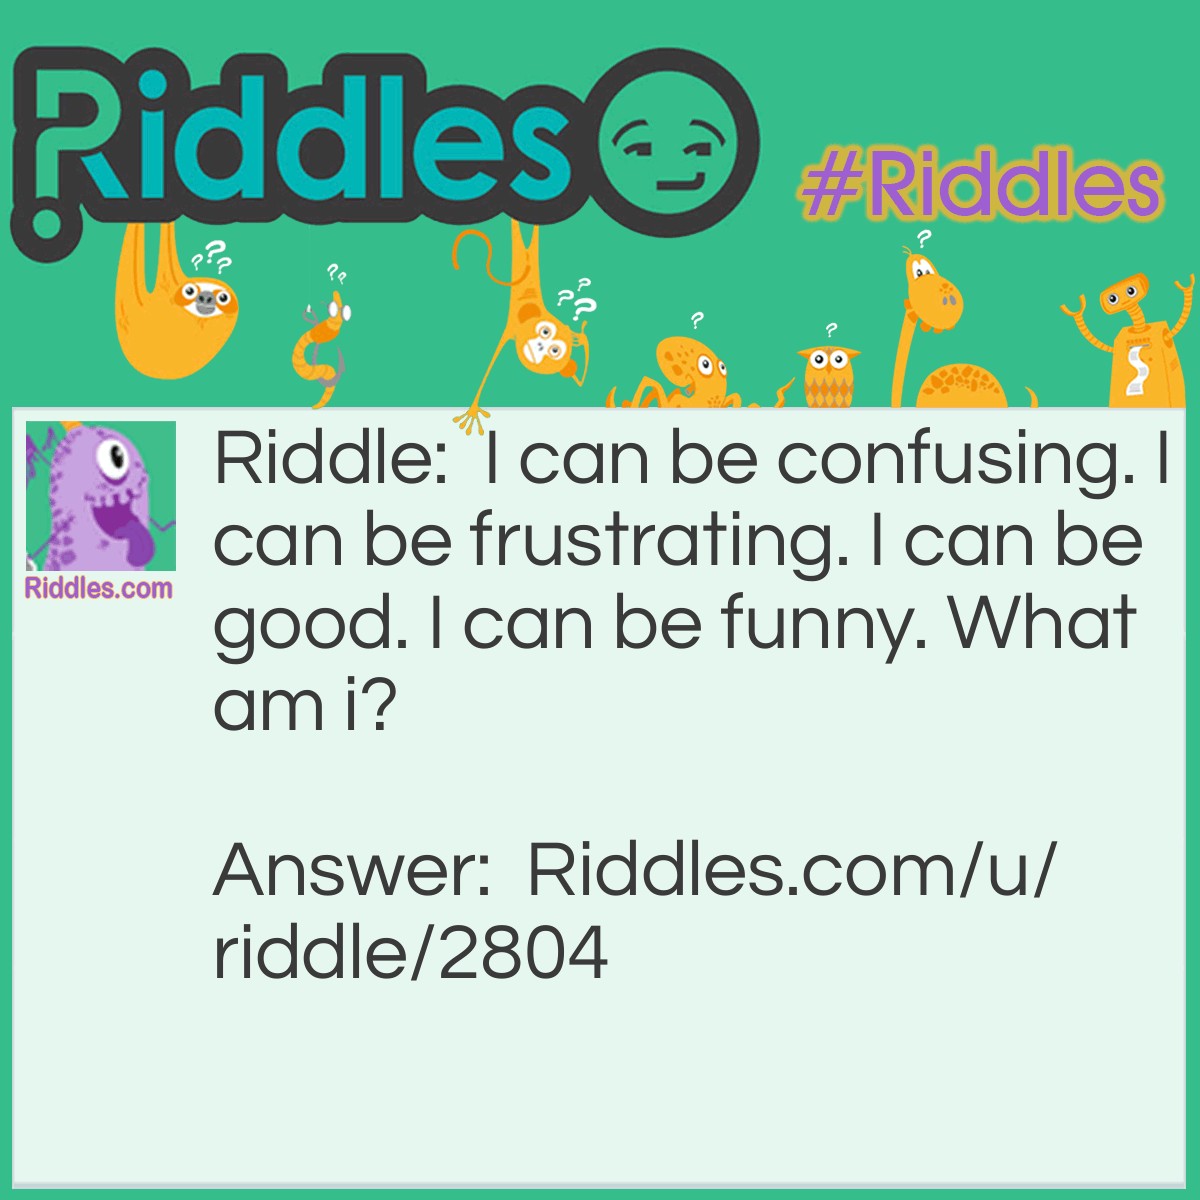 Riddle: I can be confusing. I can be frustrating. I can be good. I can be <a title="Funny Riddles" href="https://www.riddles.com/funny-riddles">funny</a>. What am I? Answer: A riddle.